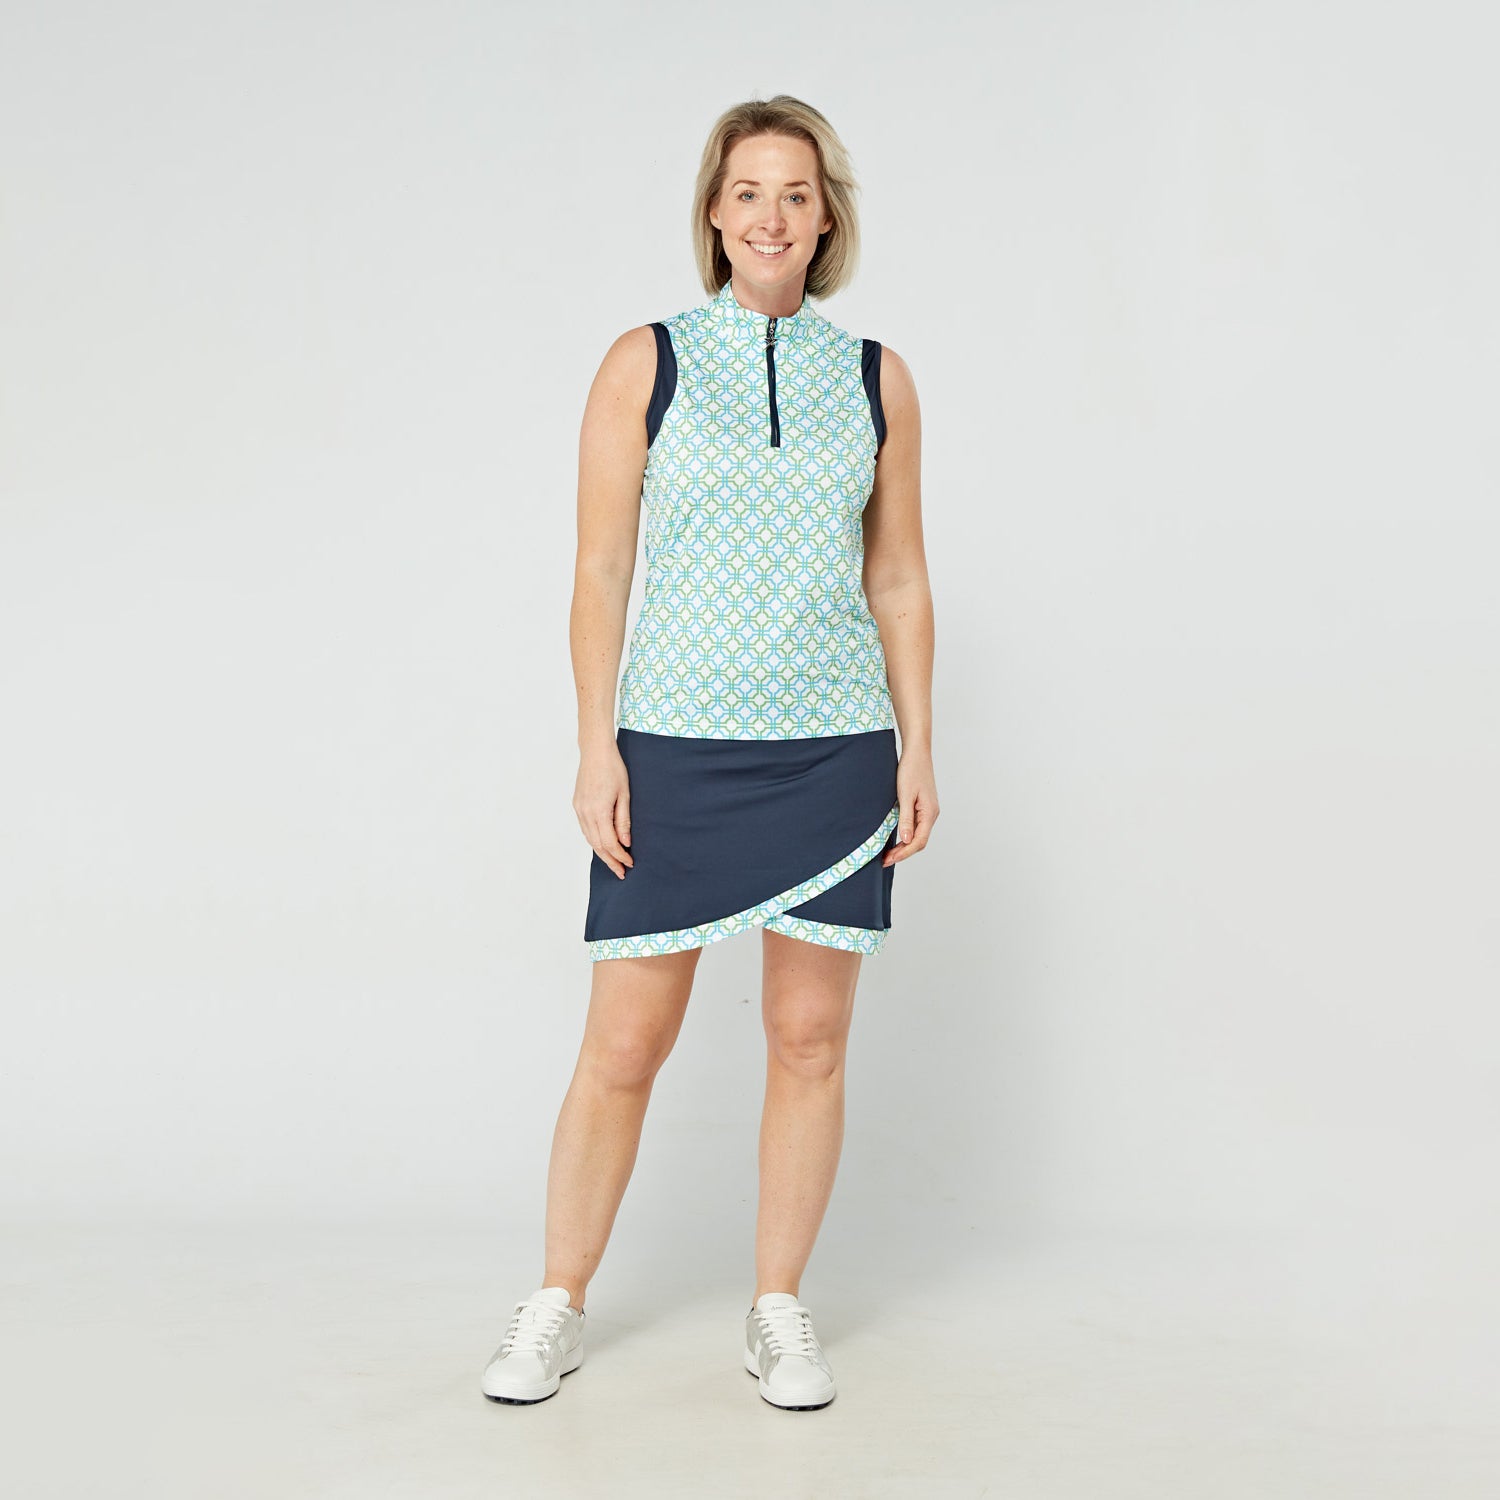 Swing Out Sister Ladies Sleeveless Zip-Neck Polo in Dazzling Blue and Emerald Mosaic Pattern